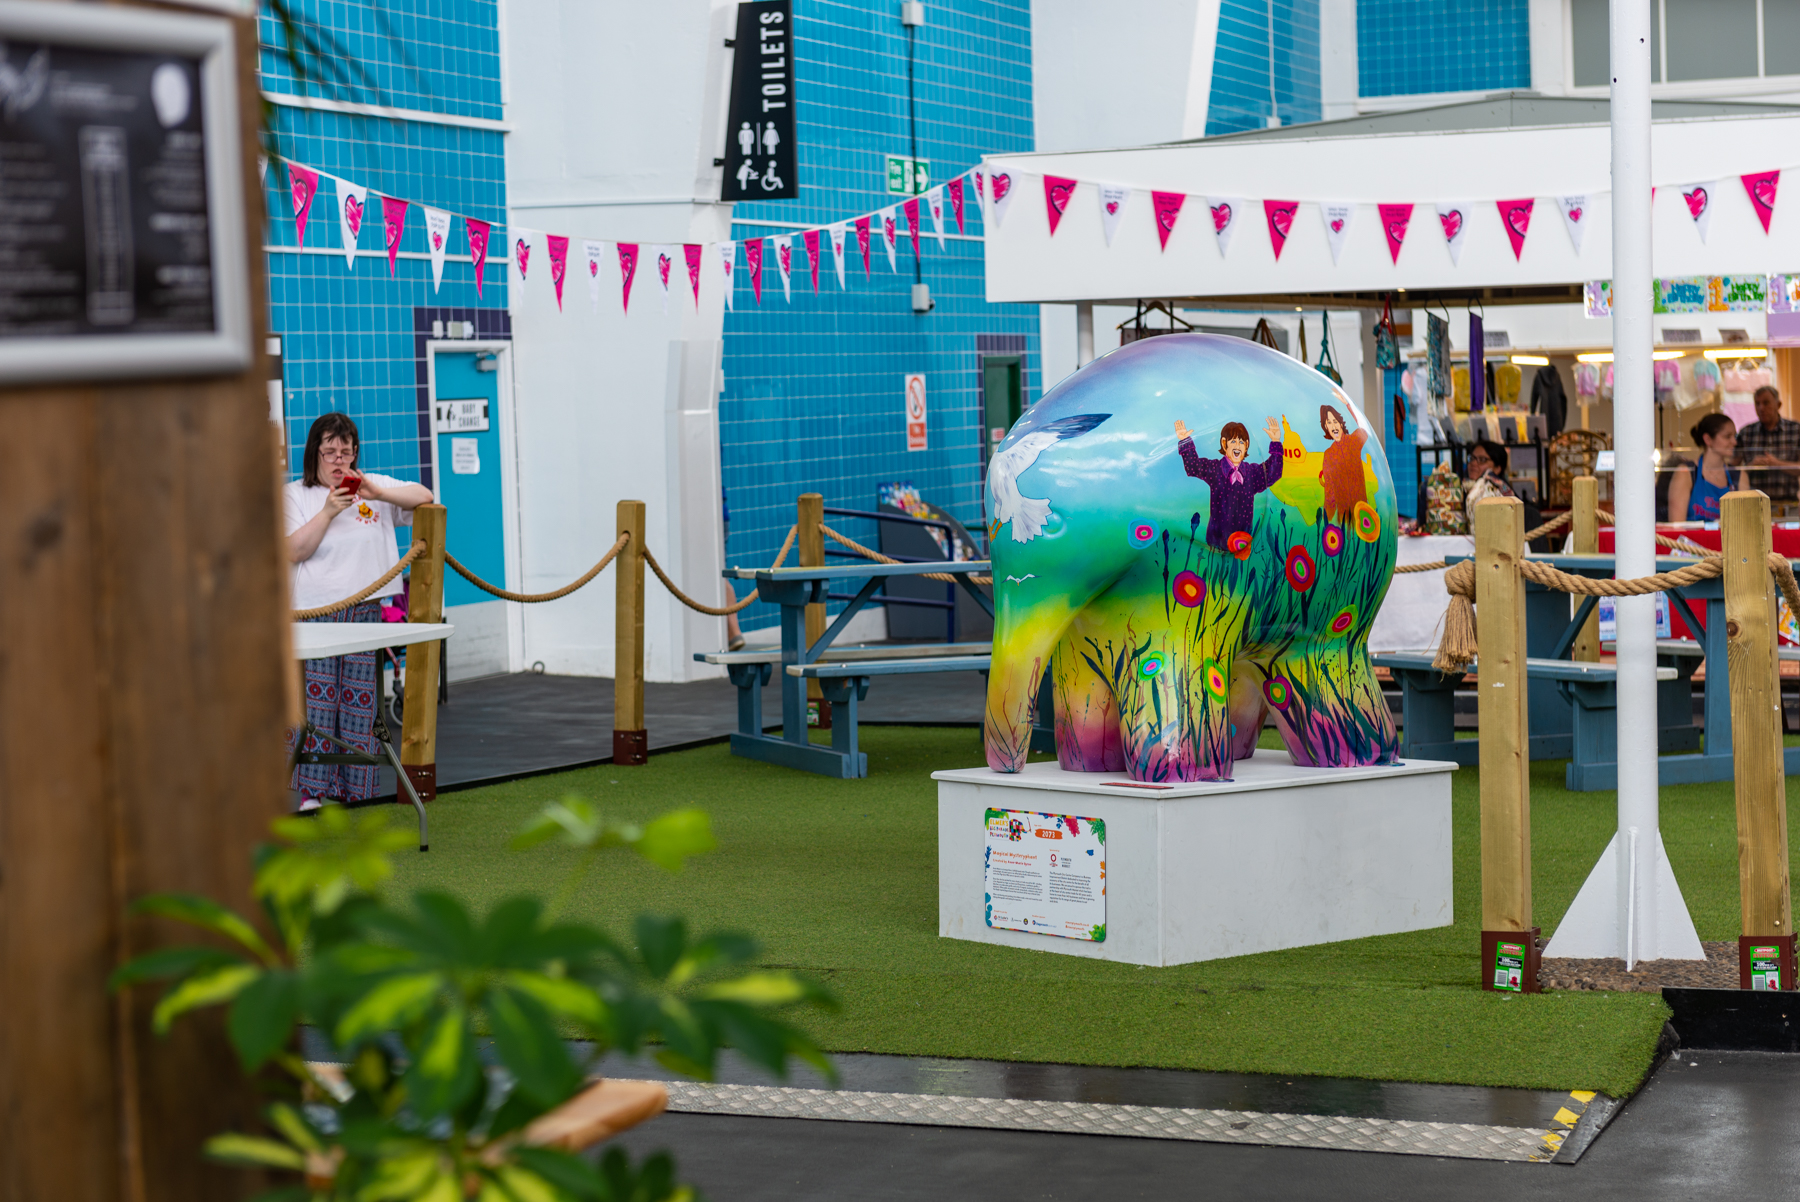 'Magical Mysteryphant' by Anne-Marie Byrne. Sponsored by Plymouth Markets/Plymouth City Centre Comp. - Image 4 of 6